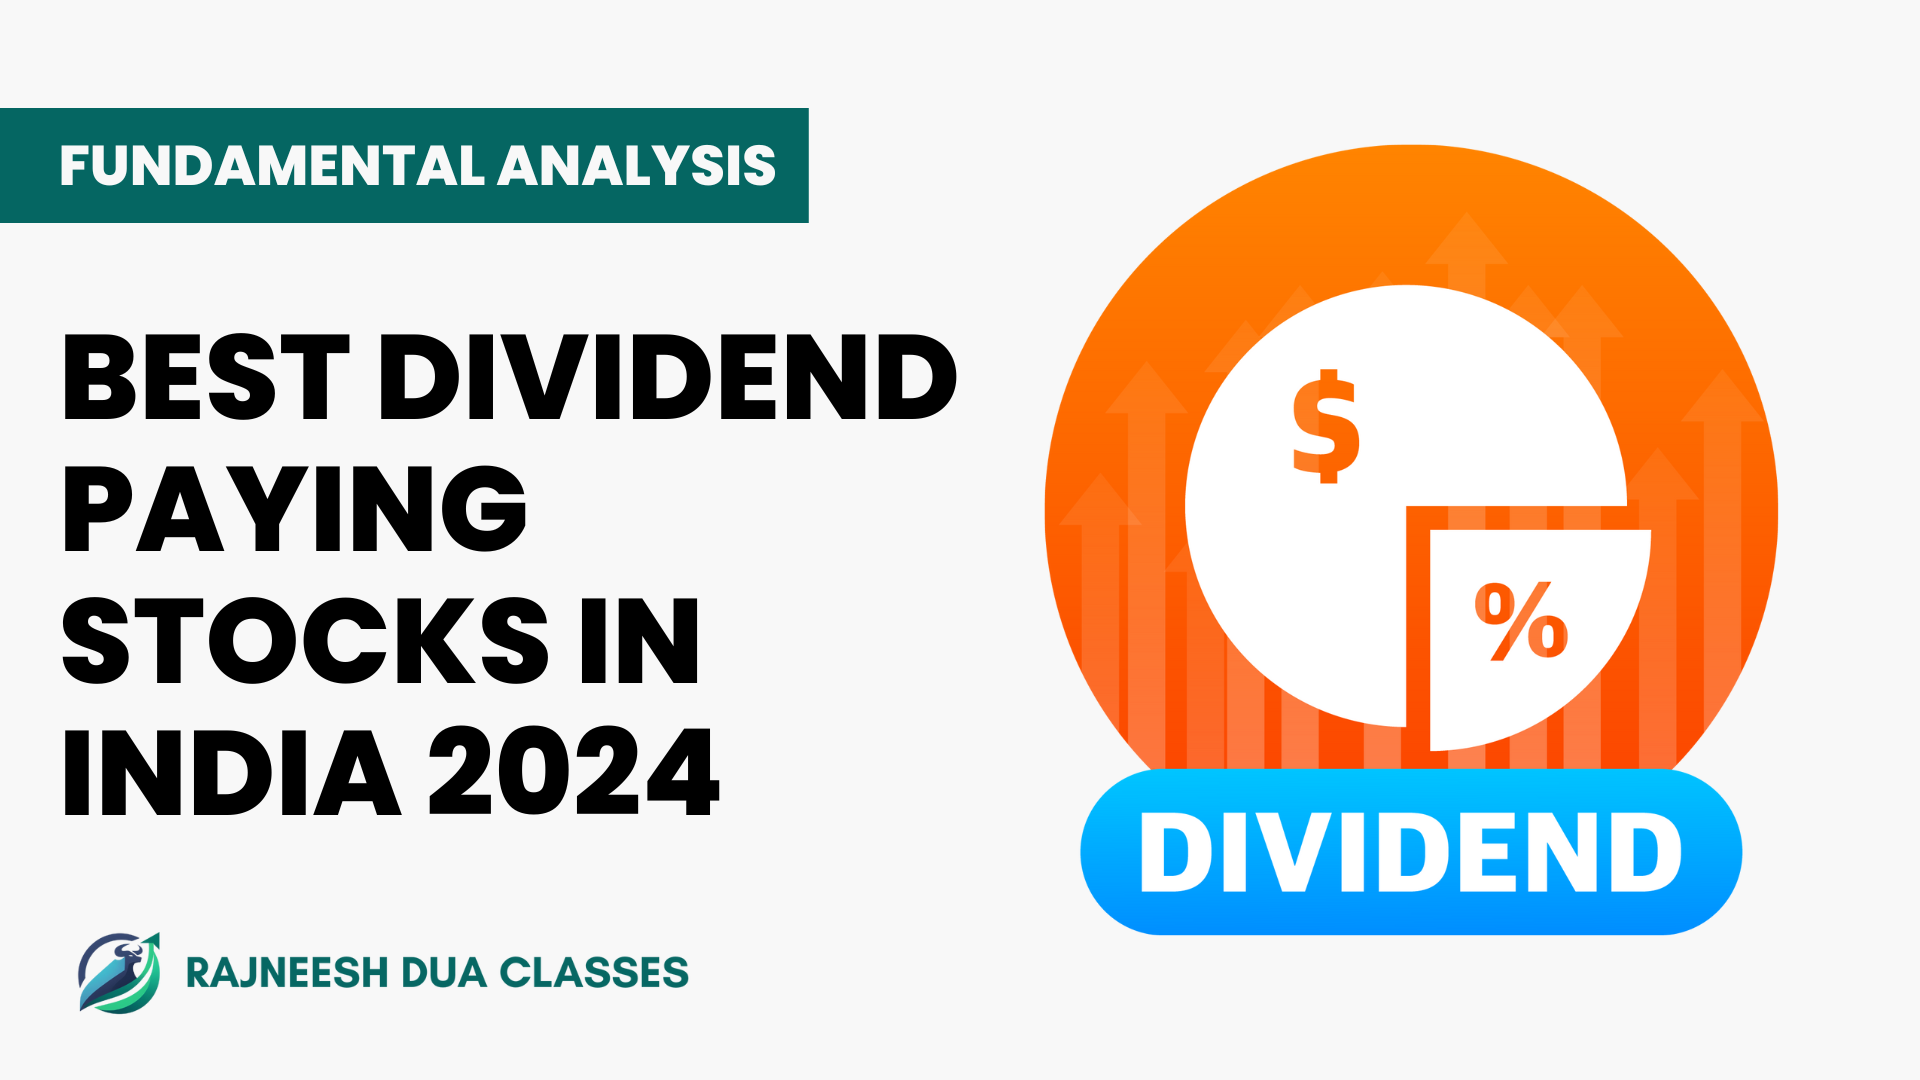 Best Dividend Paying Stocks in India 2024